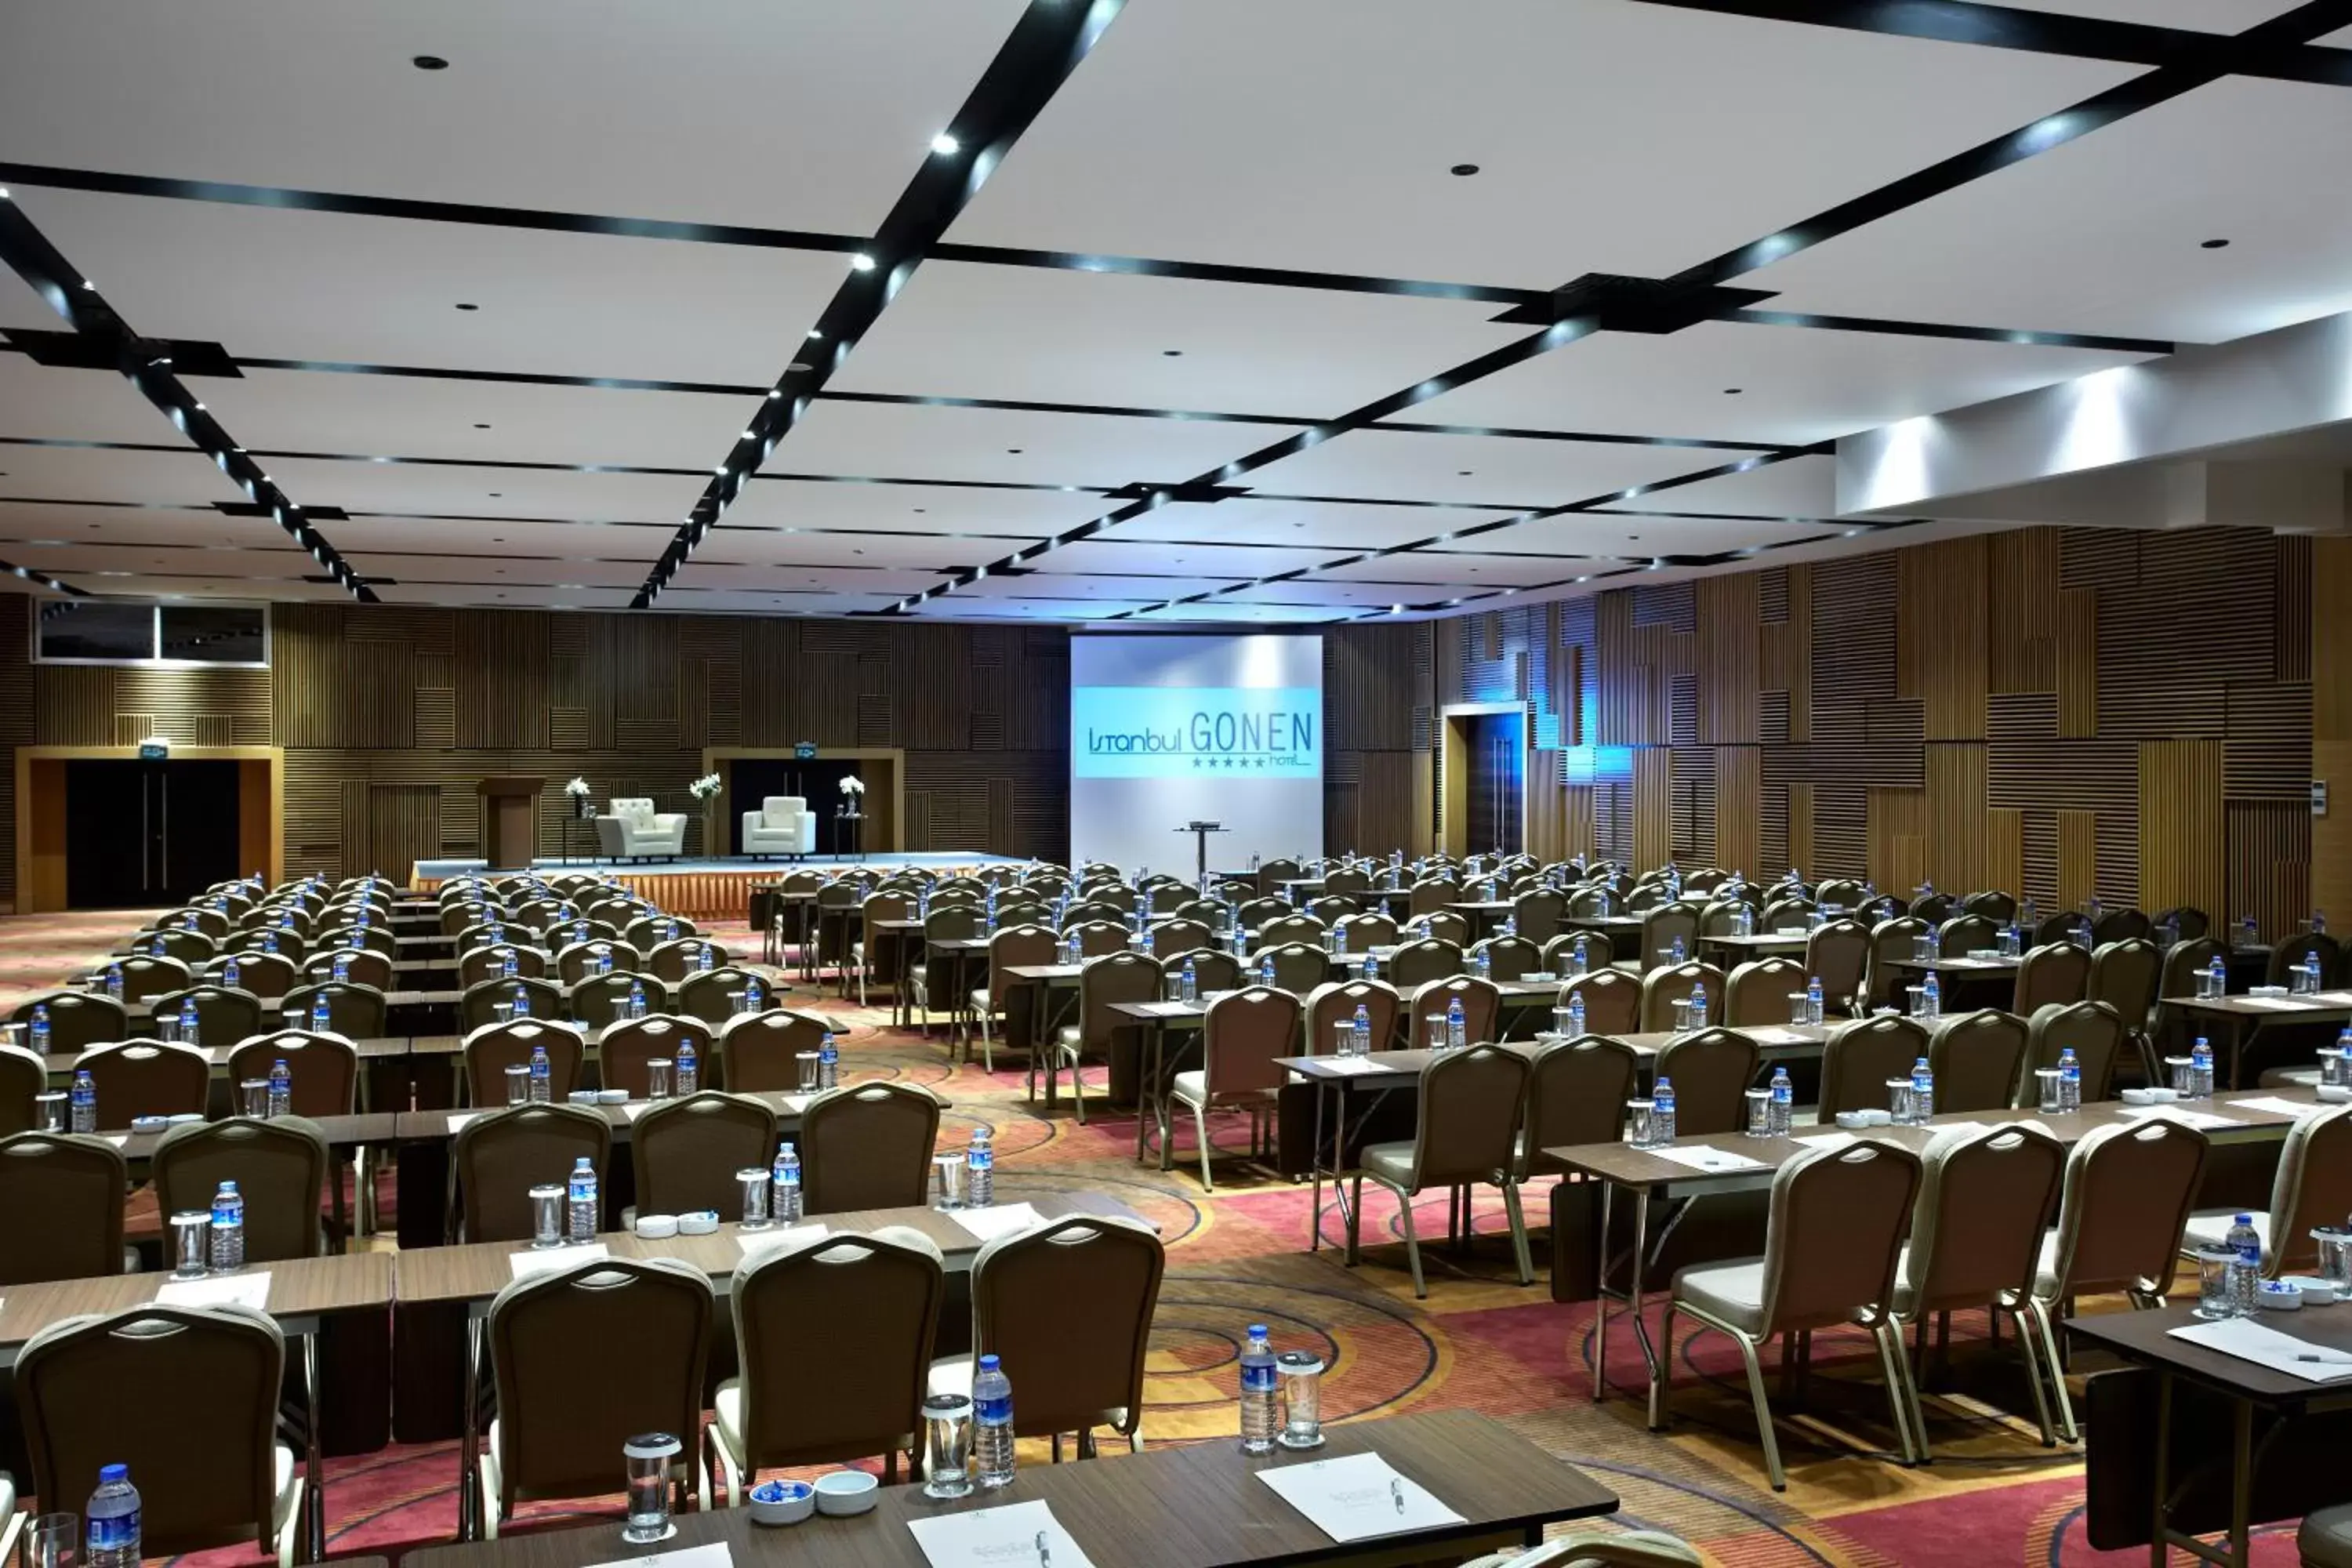 Business facilities in Istanbul Gonen Hotel